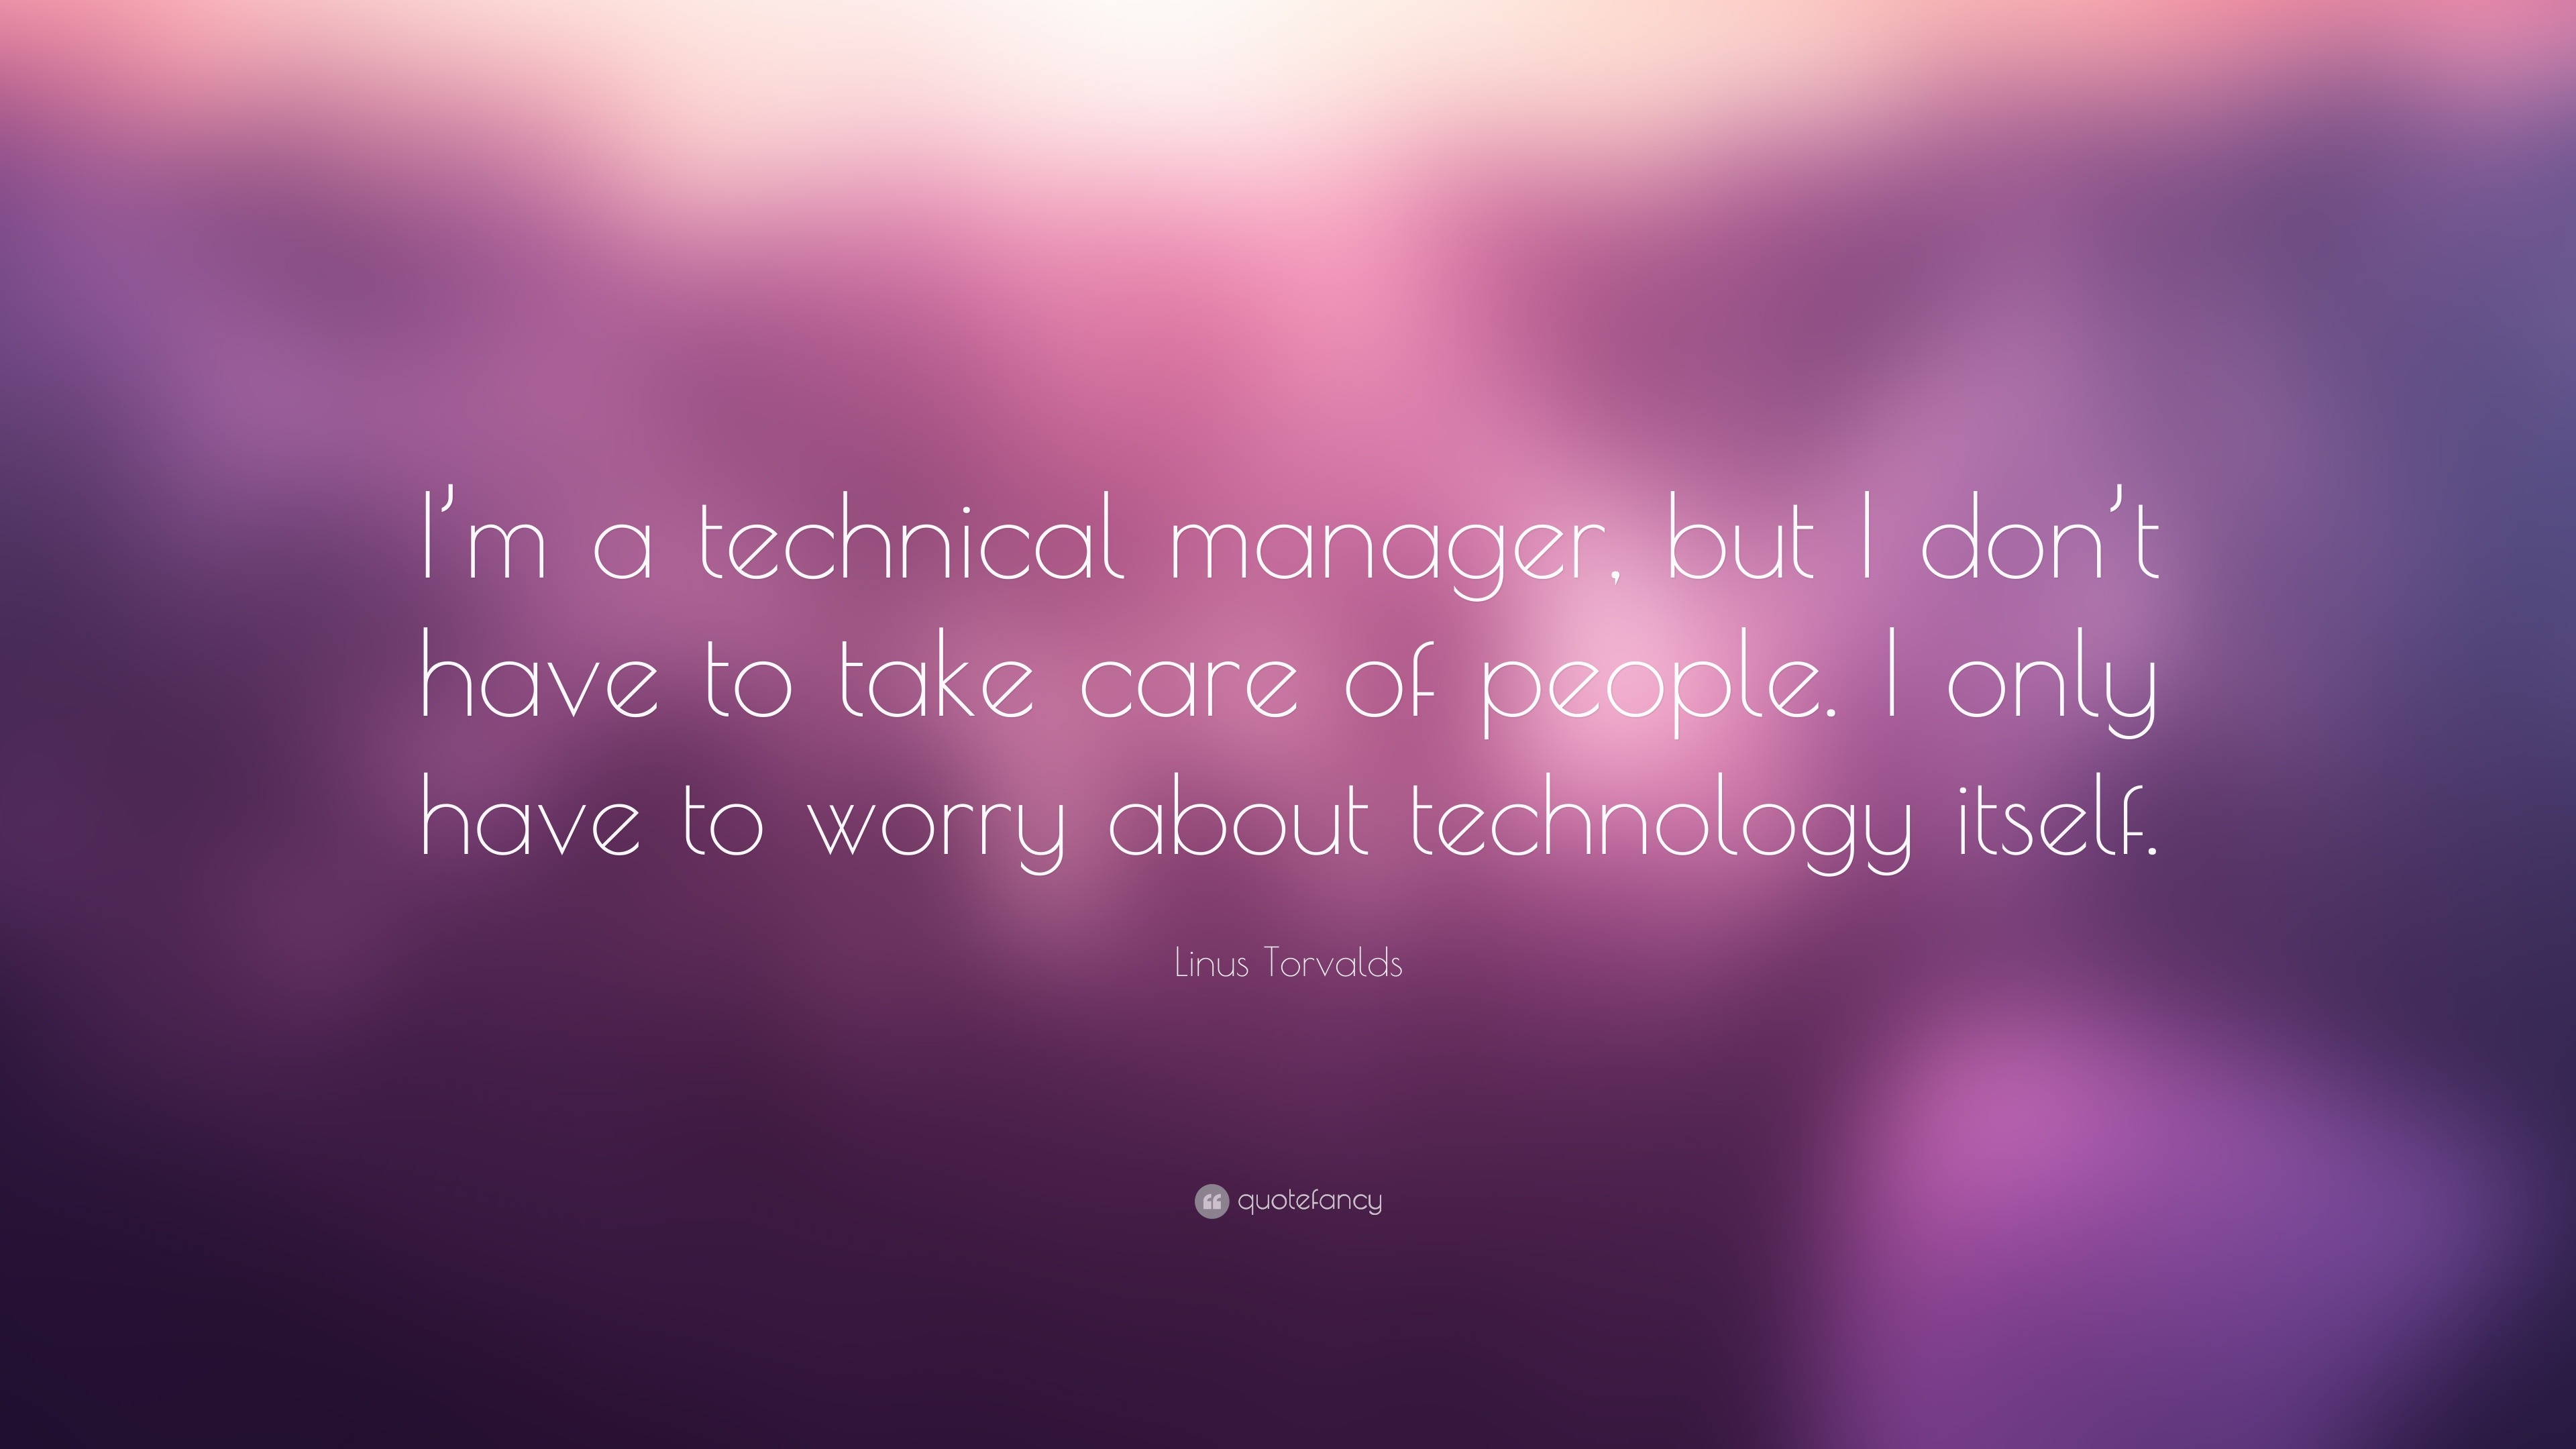 Linus Torvalds Quote: “I’m a technical manager, but I don’t have to take care of ...3840 x 2160